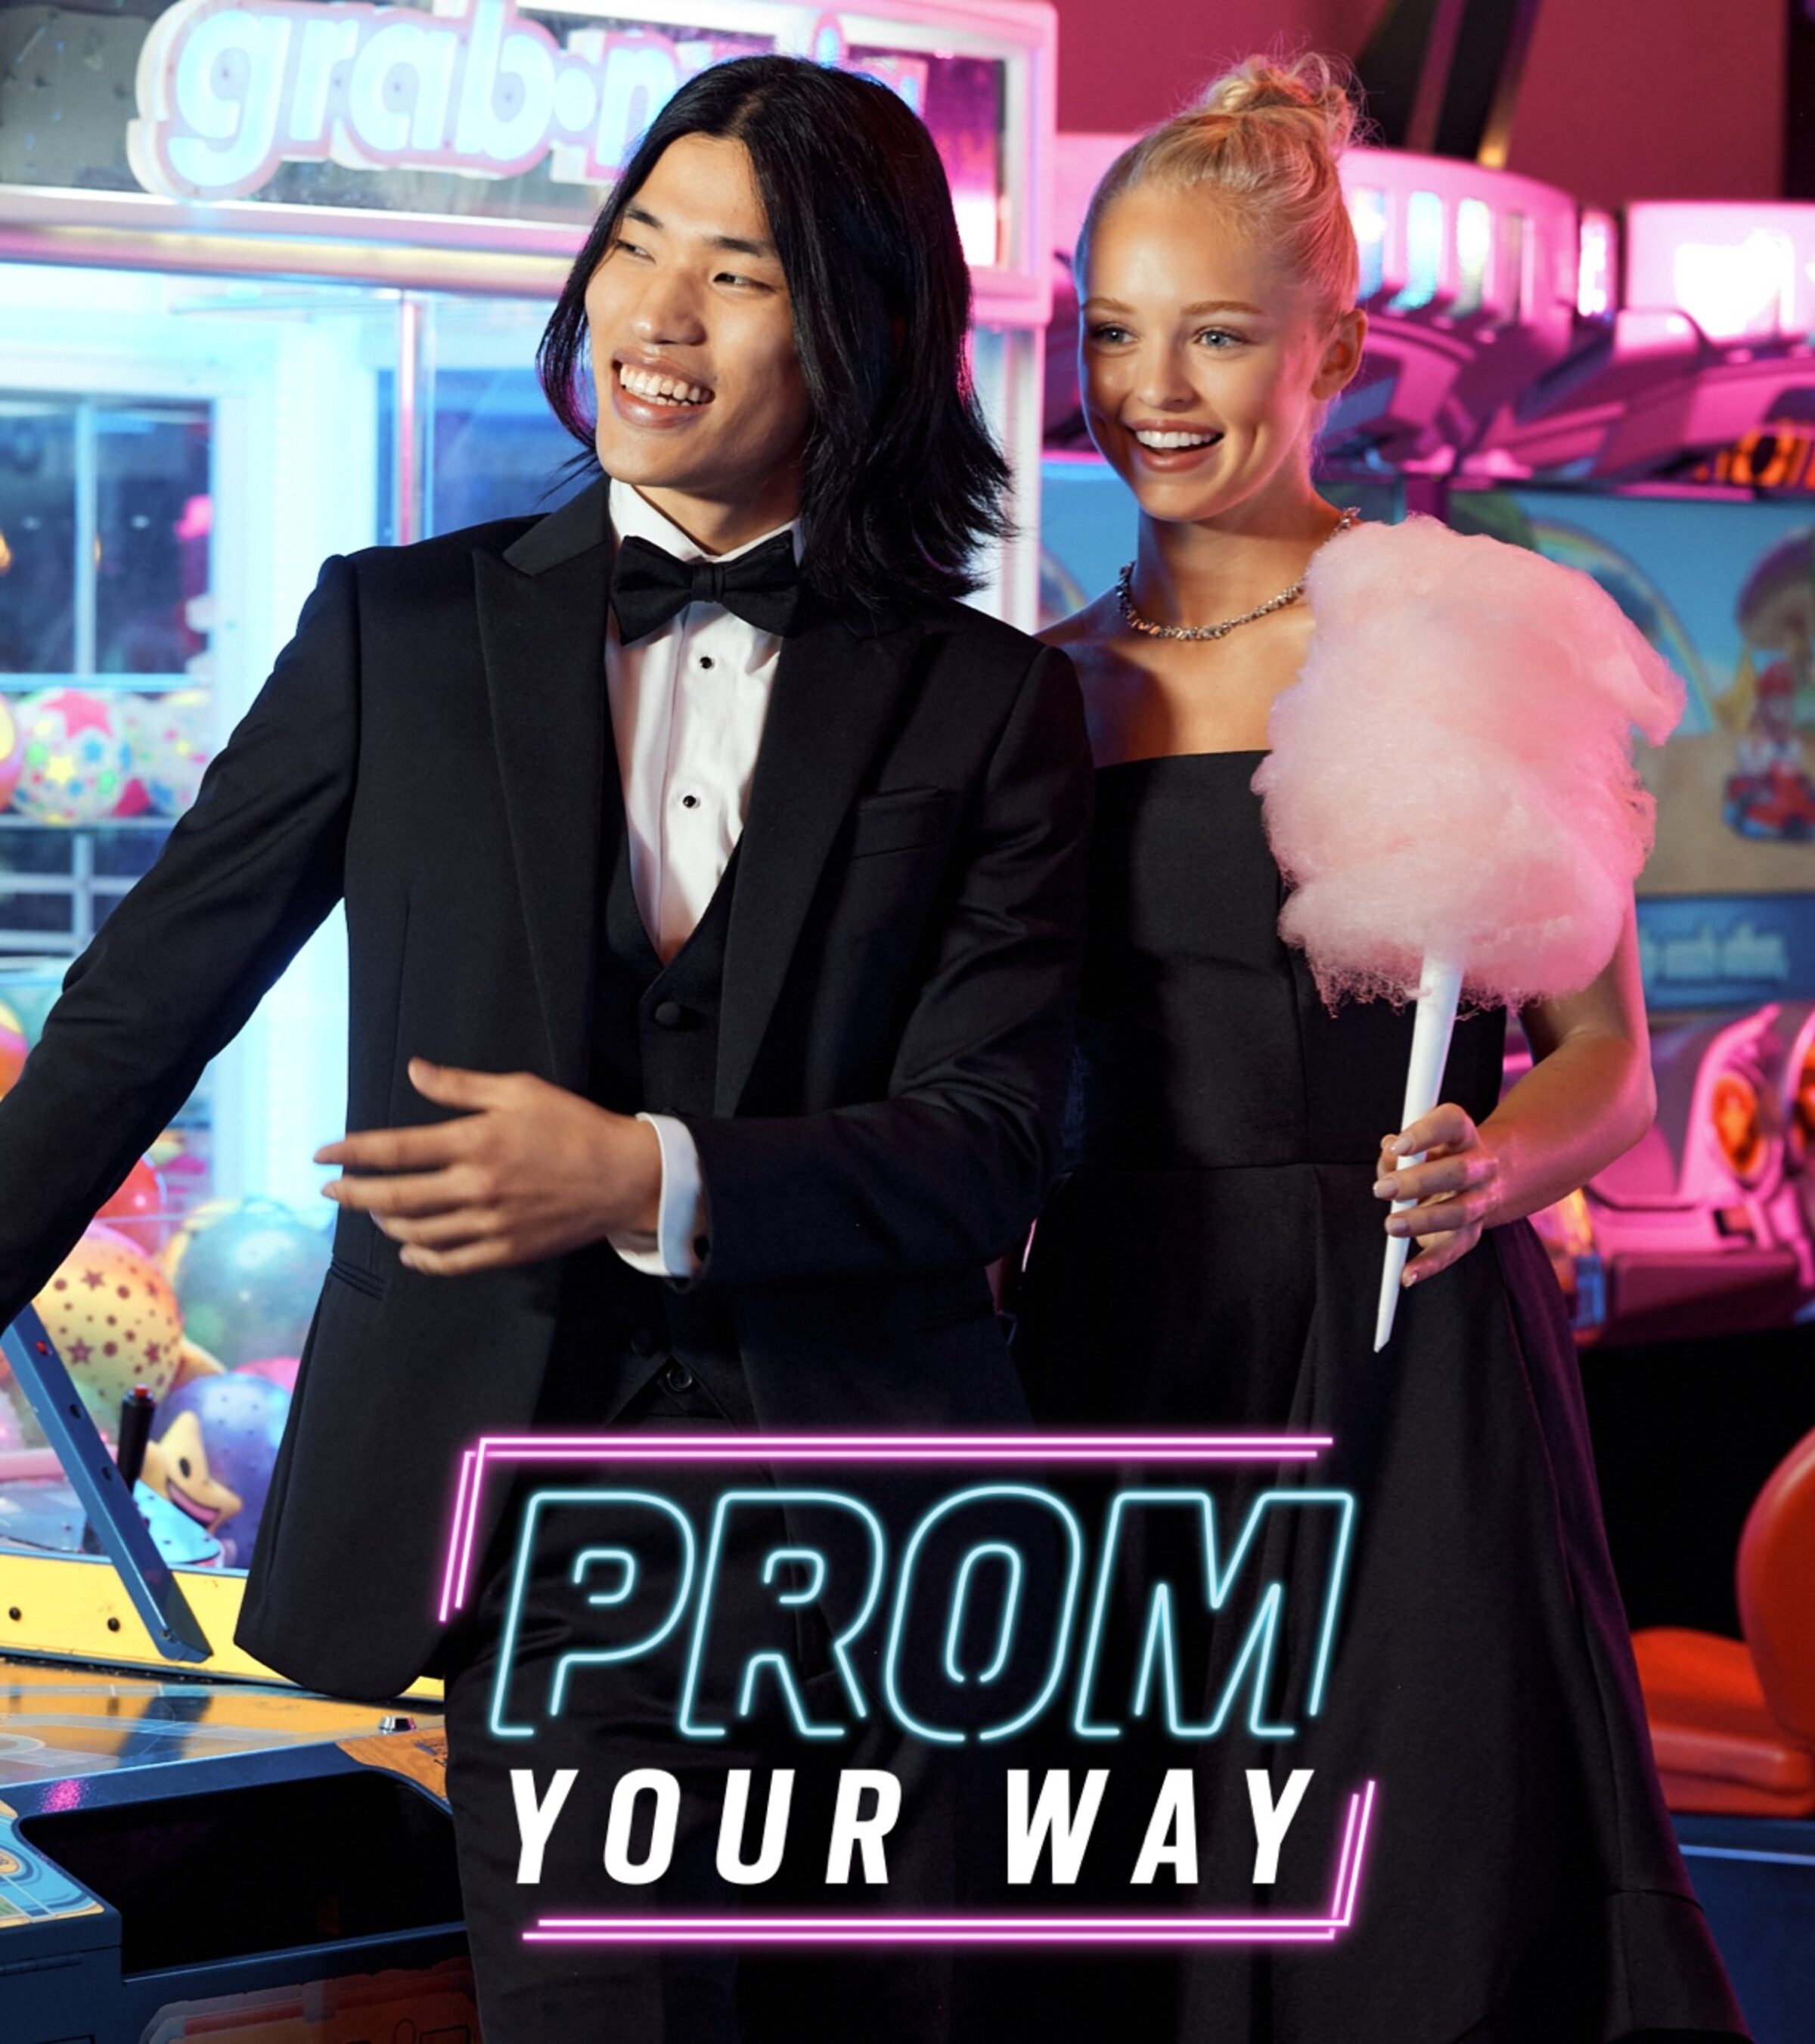 PROM YOUR WAY